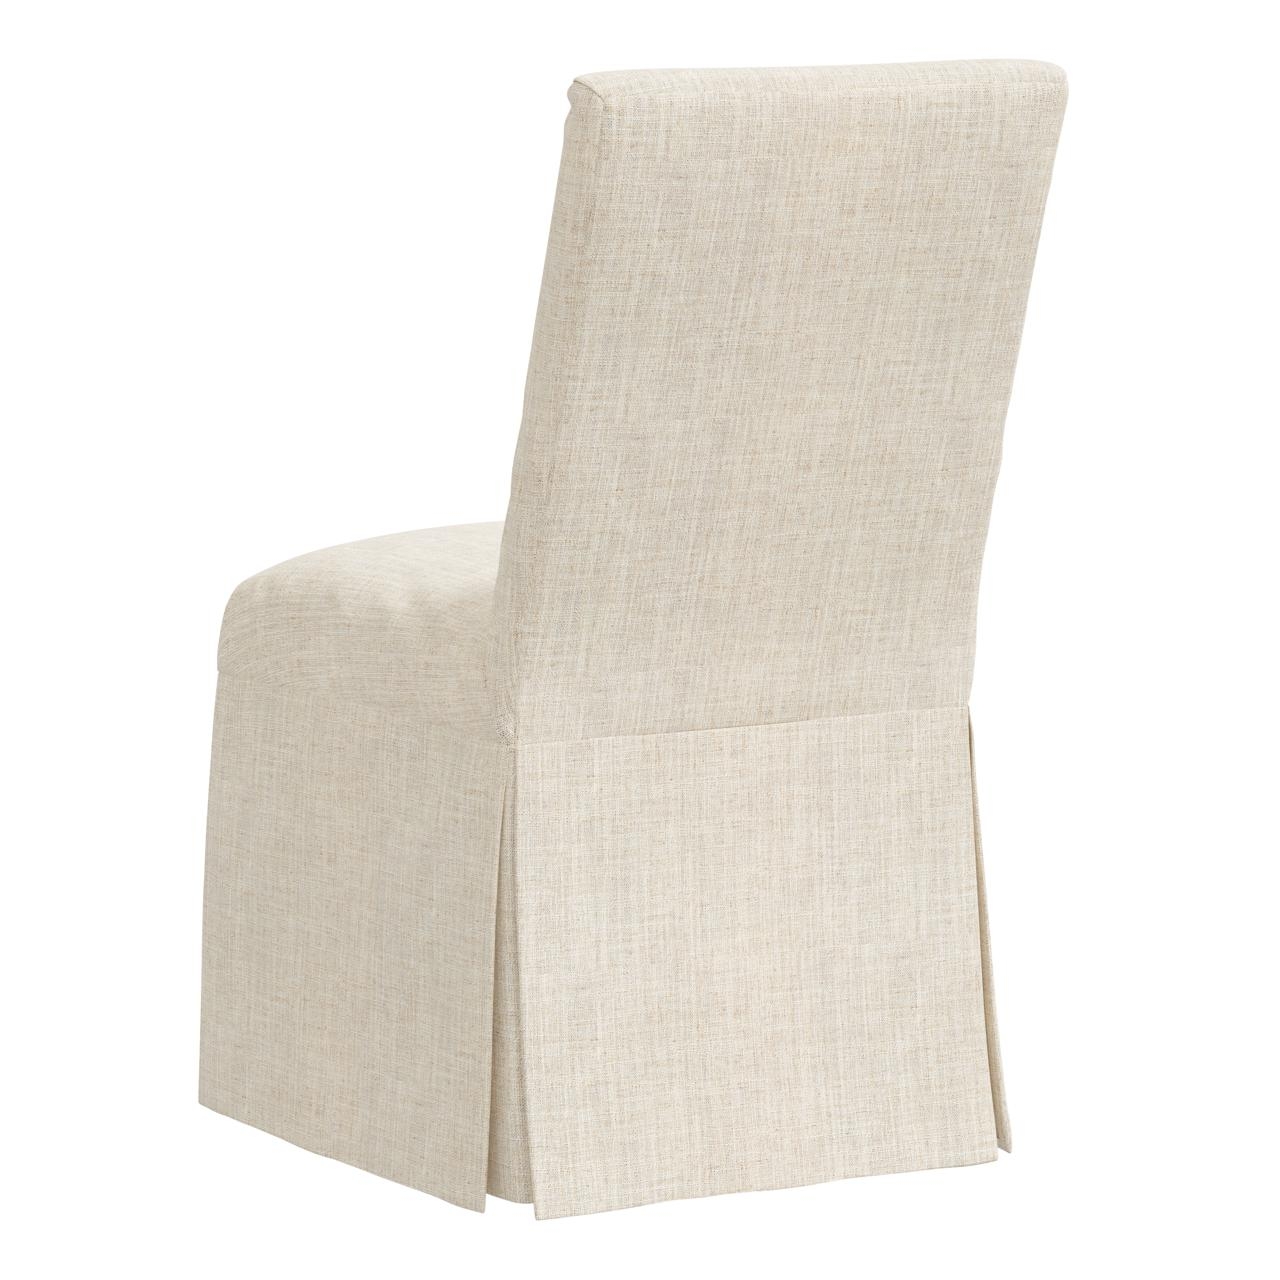 Magnolia Slipcover Dining Chair, Talc - Image 3